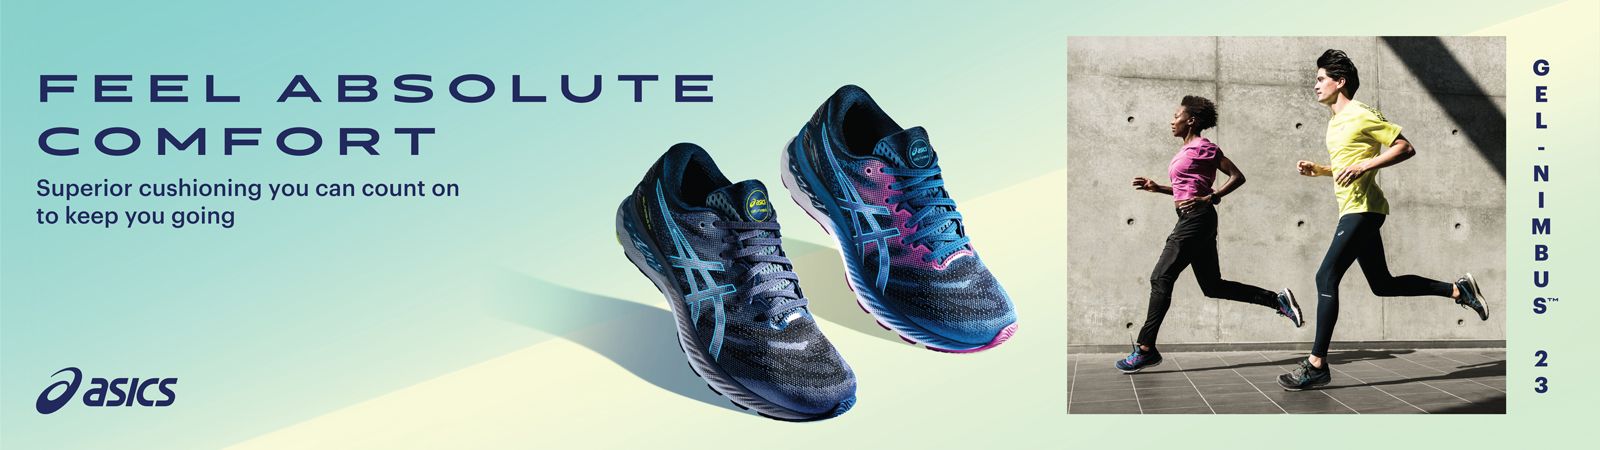 total sports asics running shoes